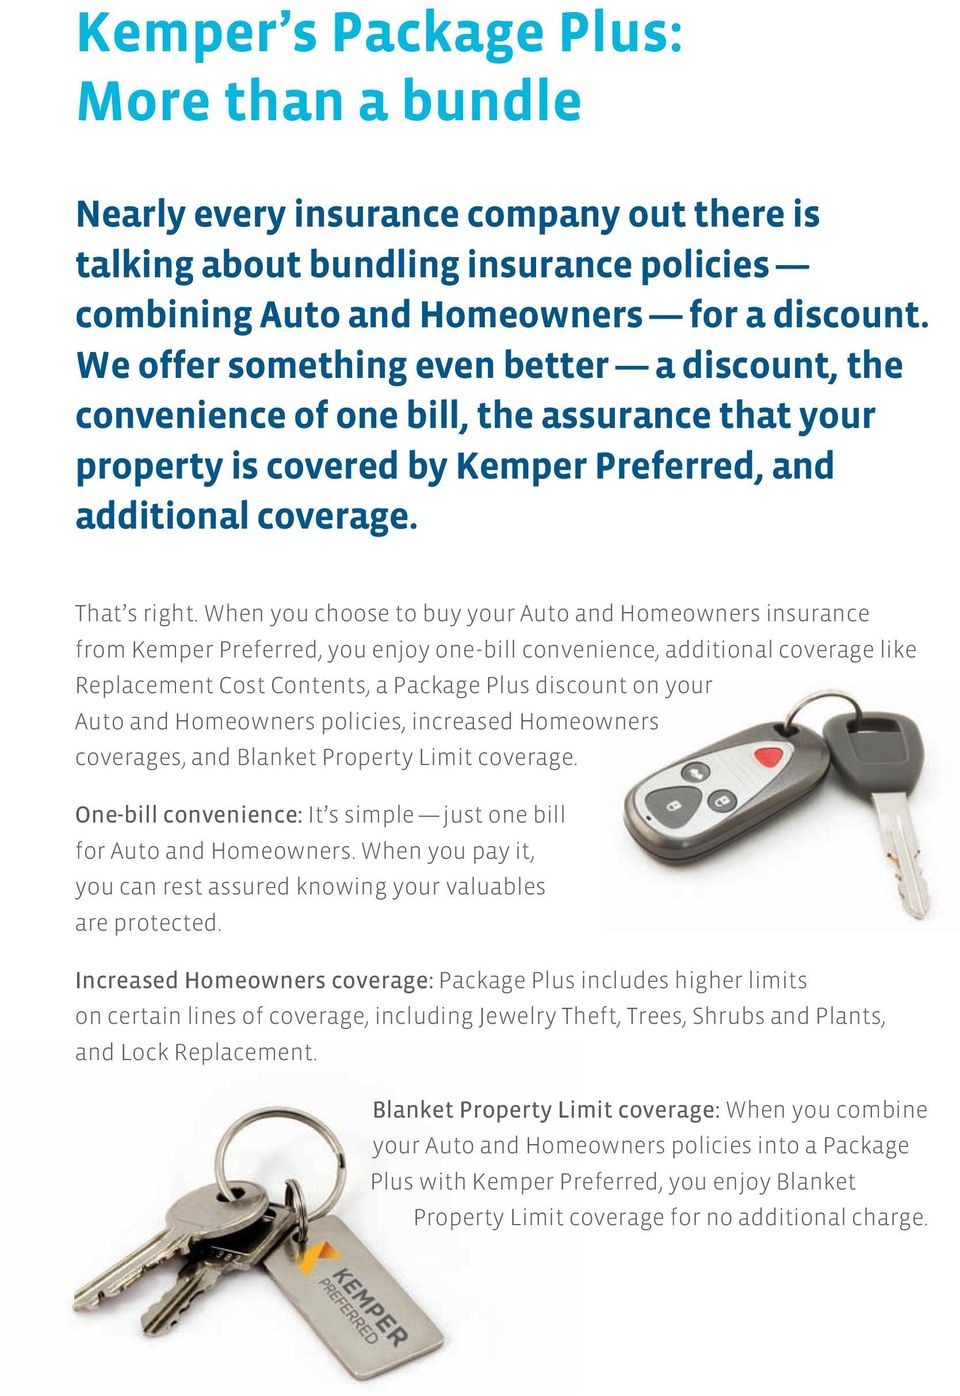 When you choose to buy your Auto and Homeowners insurance from Kemper Preferred, you enjoy one-bill convenience, additional coverage like Replacement Cost Contents, a Package Plus discount on your